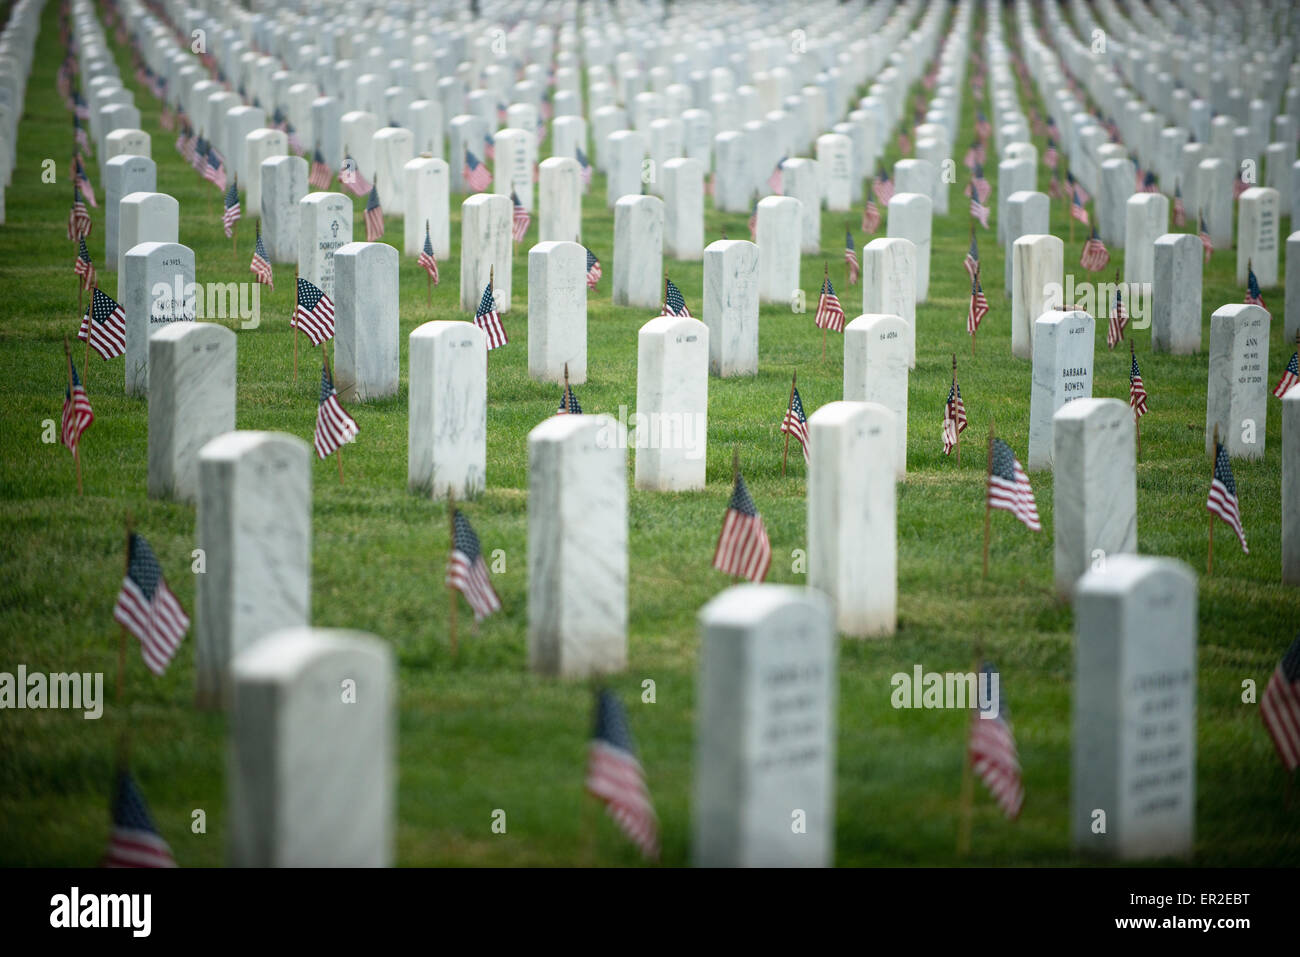 U.S. flags in front of grave sites in honor of Memorial Day at Arlington National Cemetery May 21, 2015 in Arlington, Virginia. The Old Guard has conducted Flags-in, when an American flag is placed at every headstone, since 1948. Stock Photo